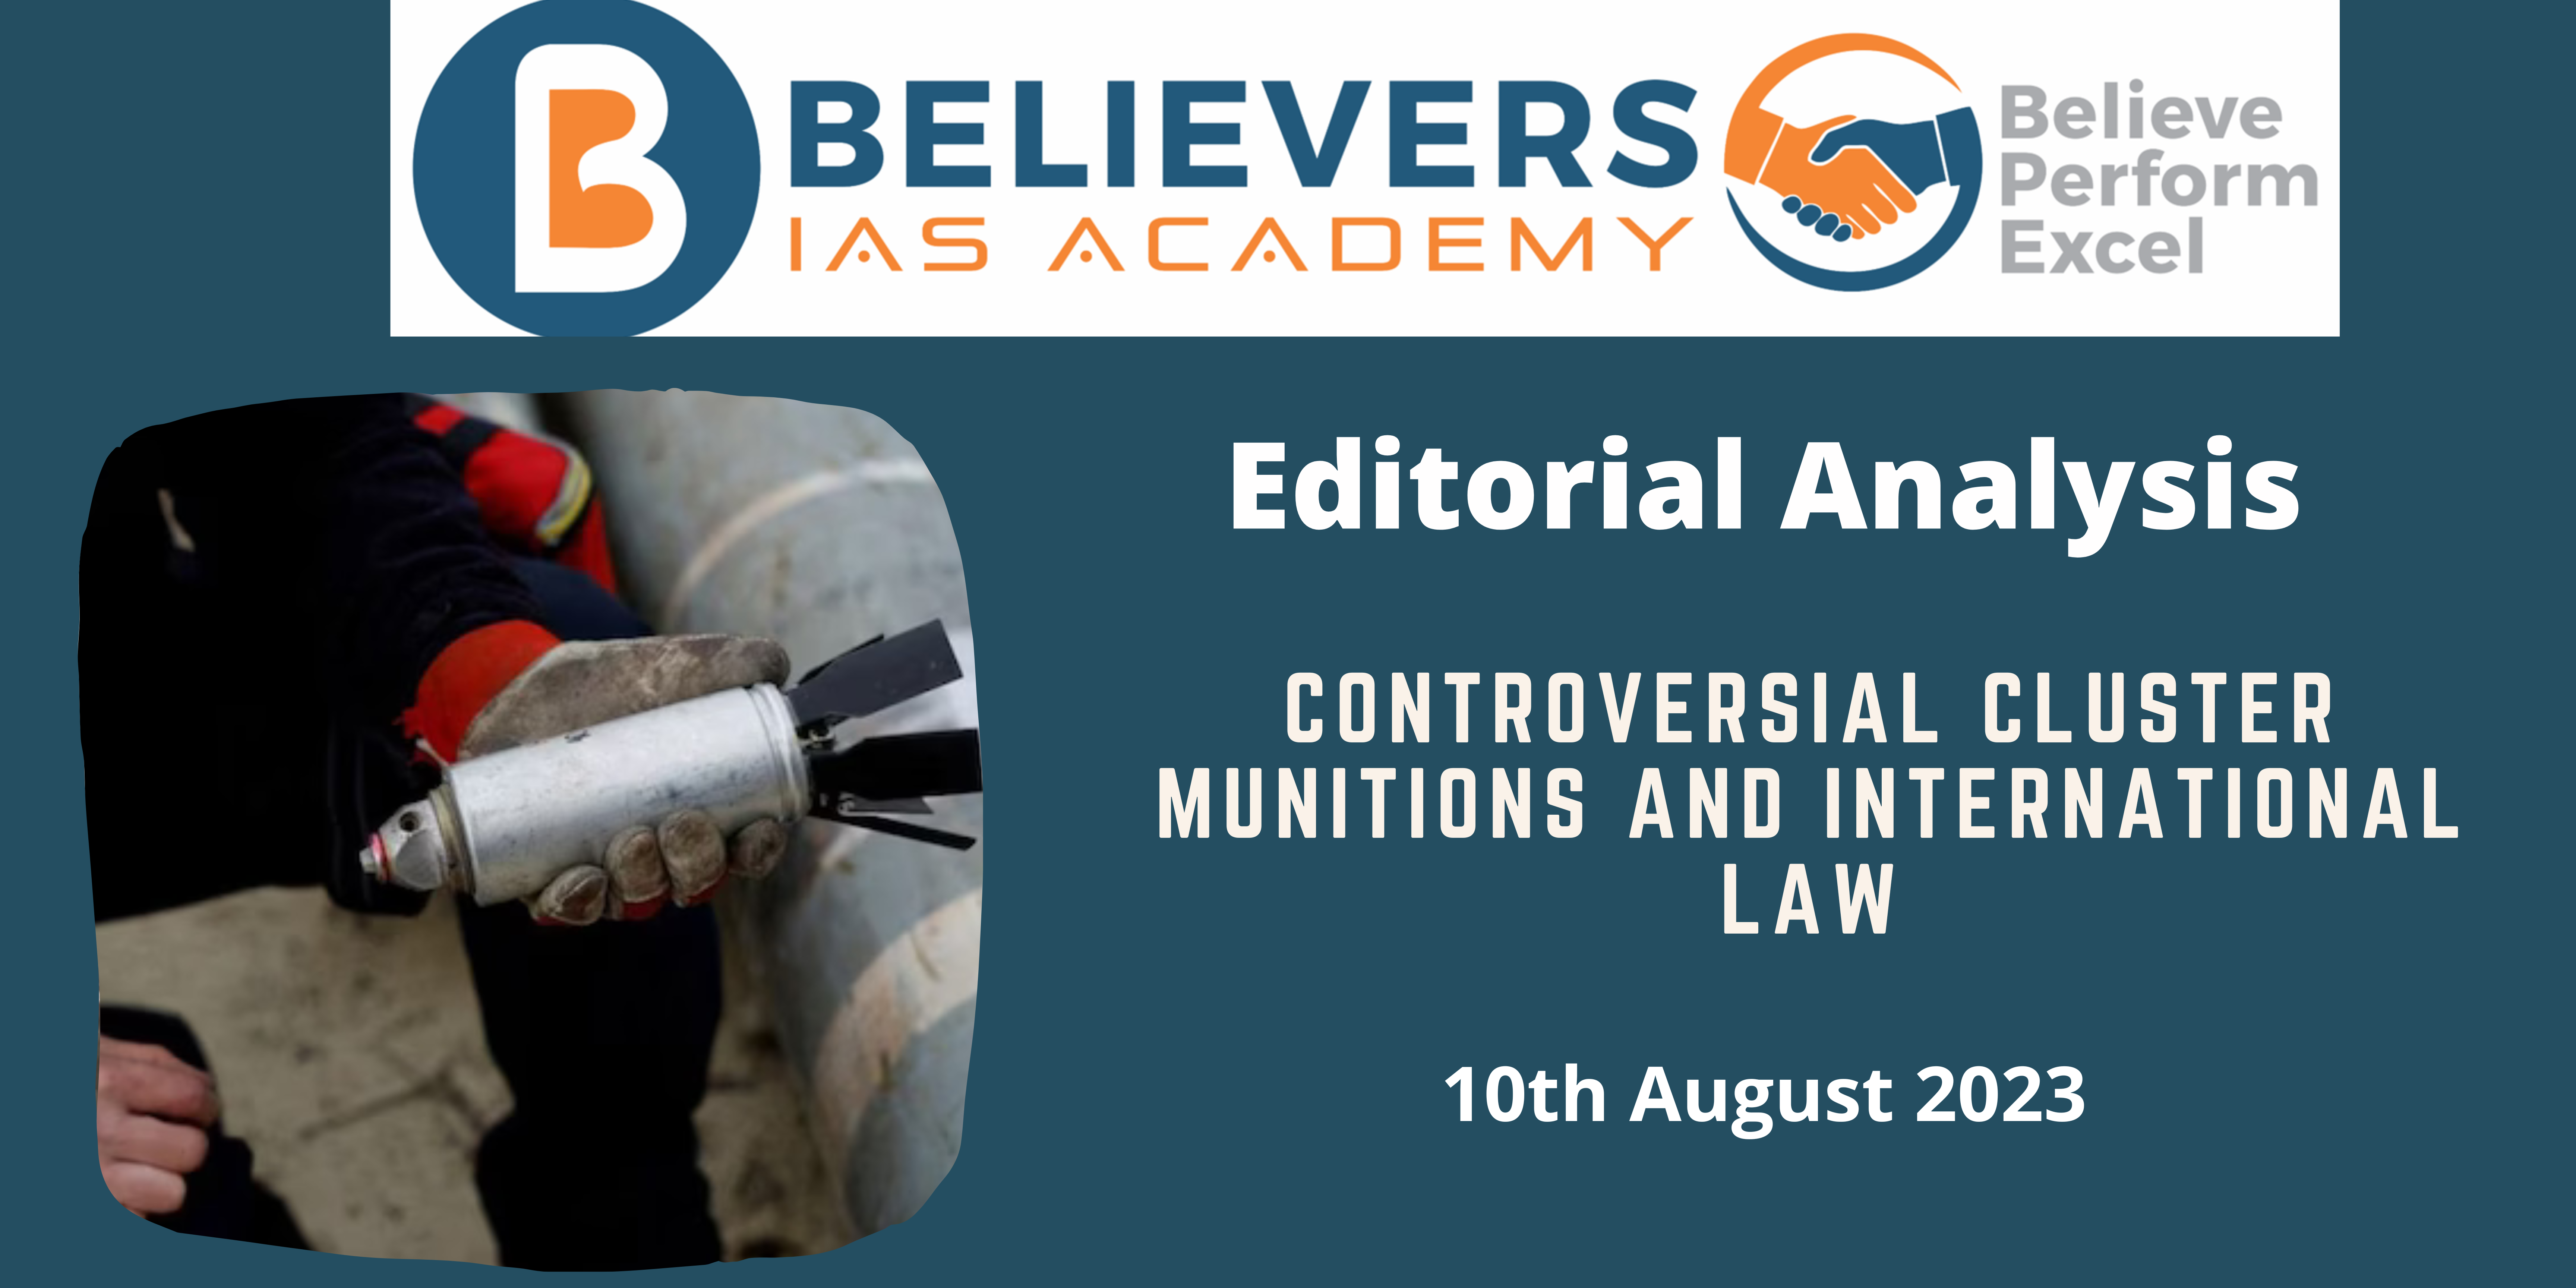 Controversial Cluster Munitions and International Law